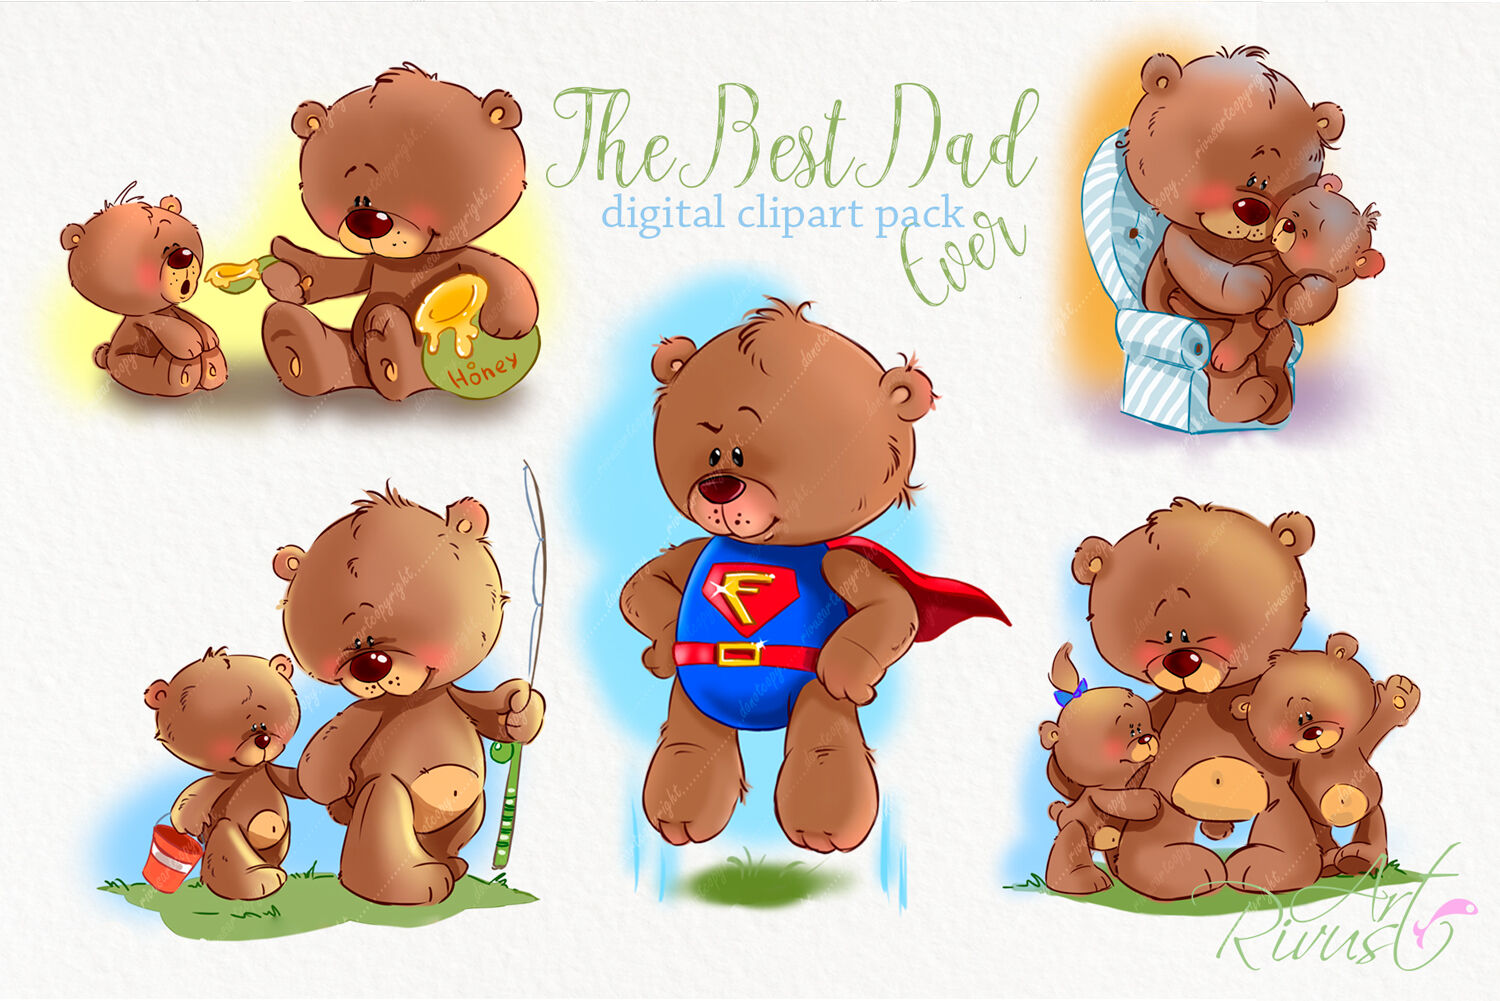 Cute teddy bears with Dad clipart Father